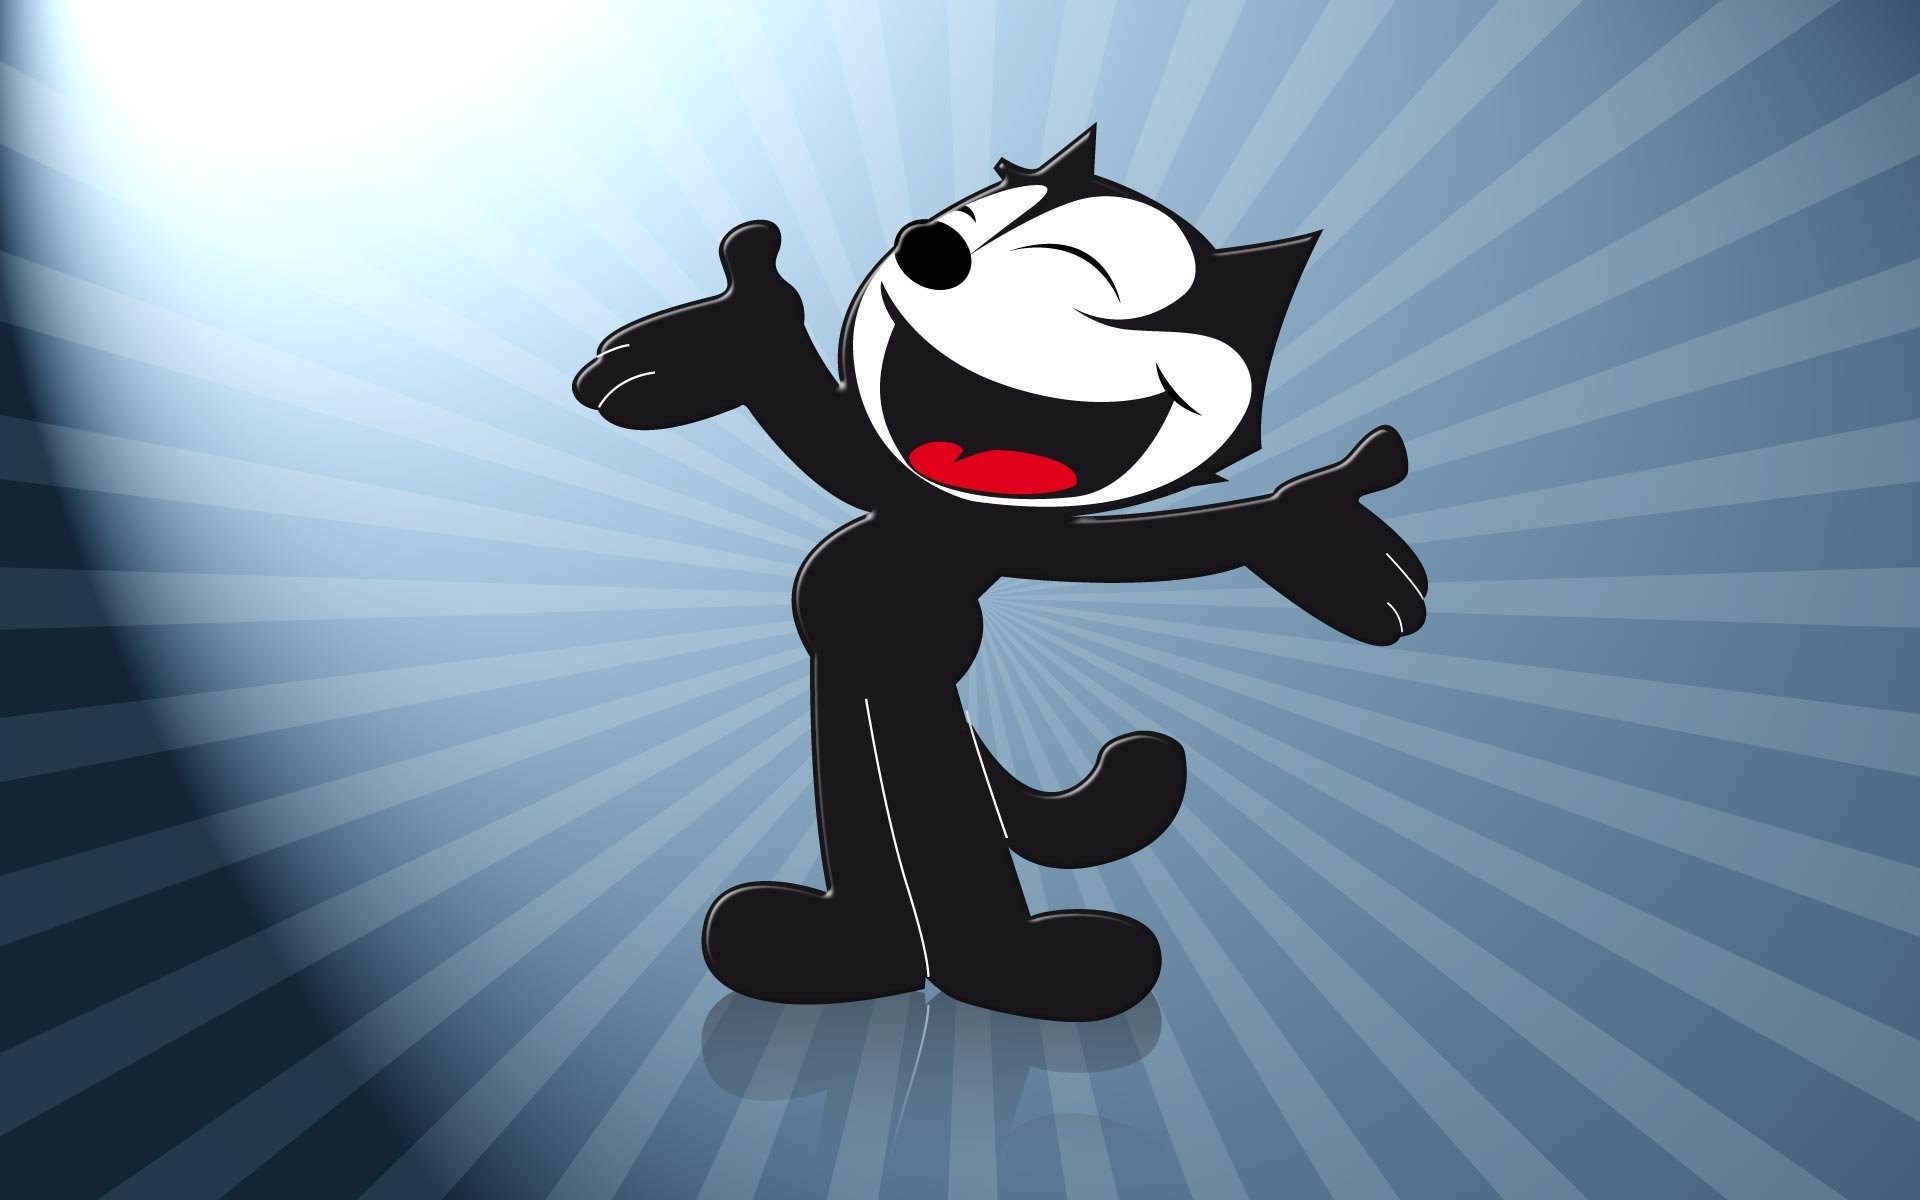 742858 download felix the cat wallpapers 1920x1200 large resolution